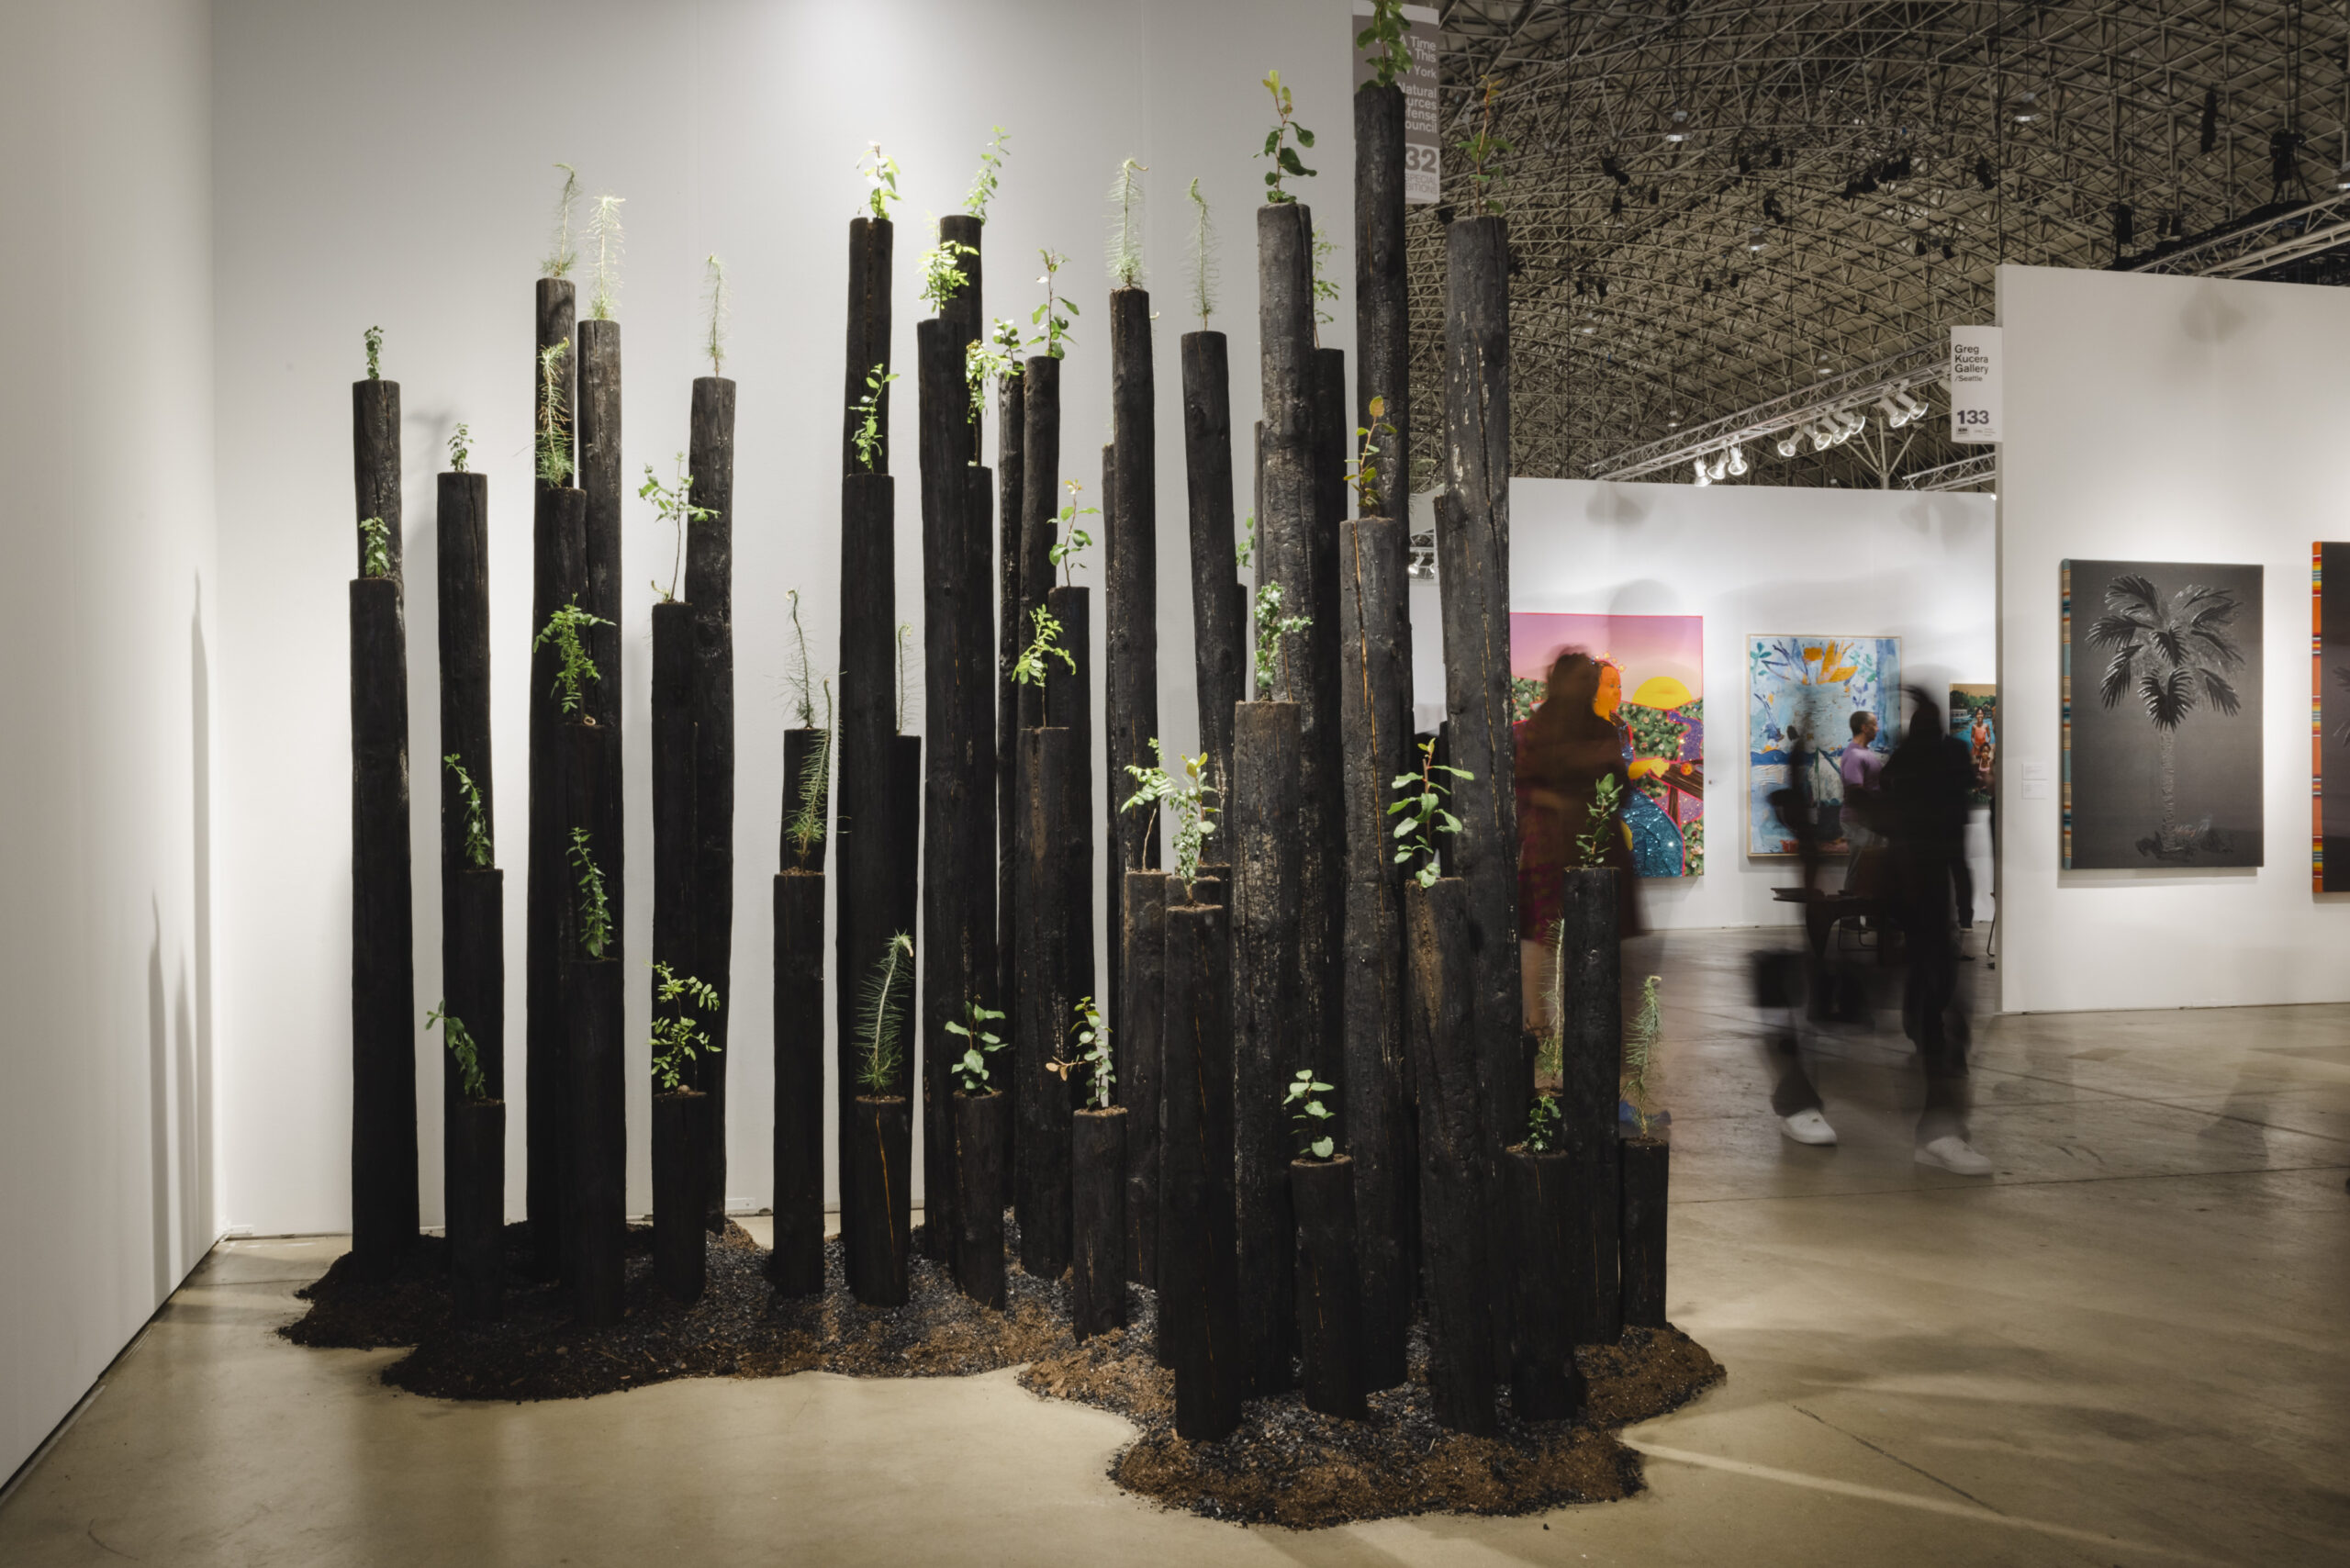 Blackened tree trunks stand in a cluster, from their flat tops small green tender saplings sprout.